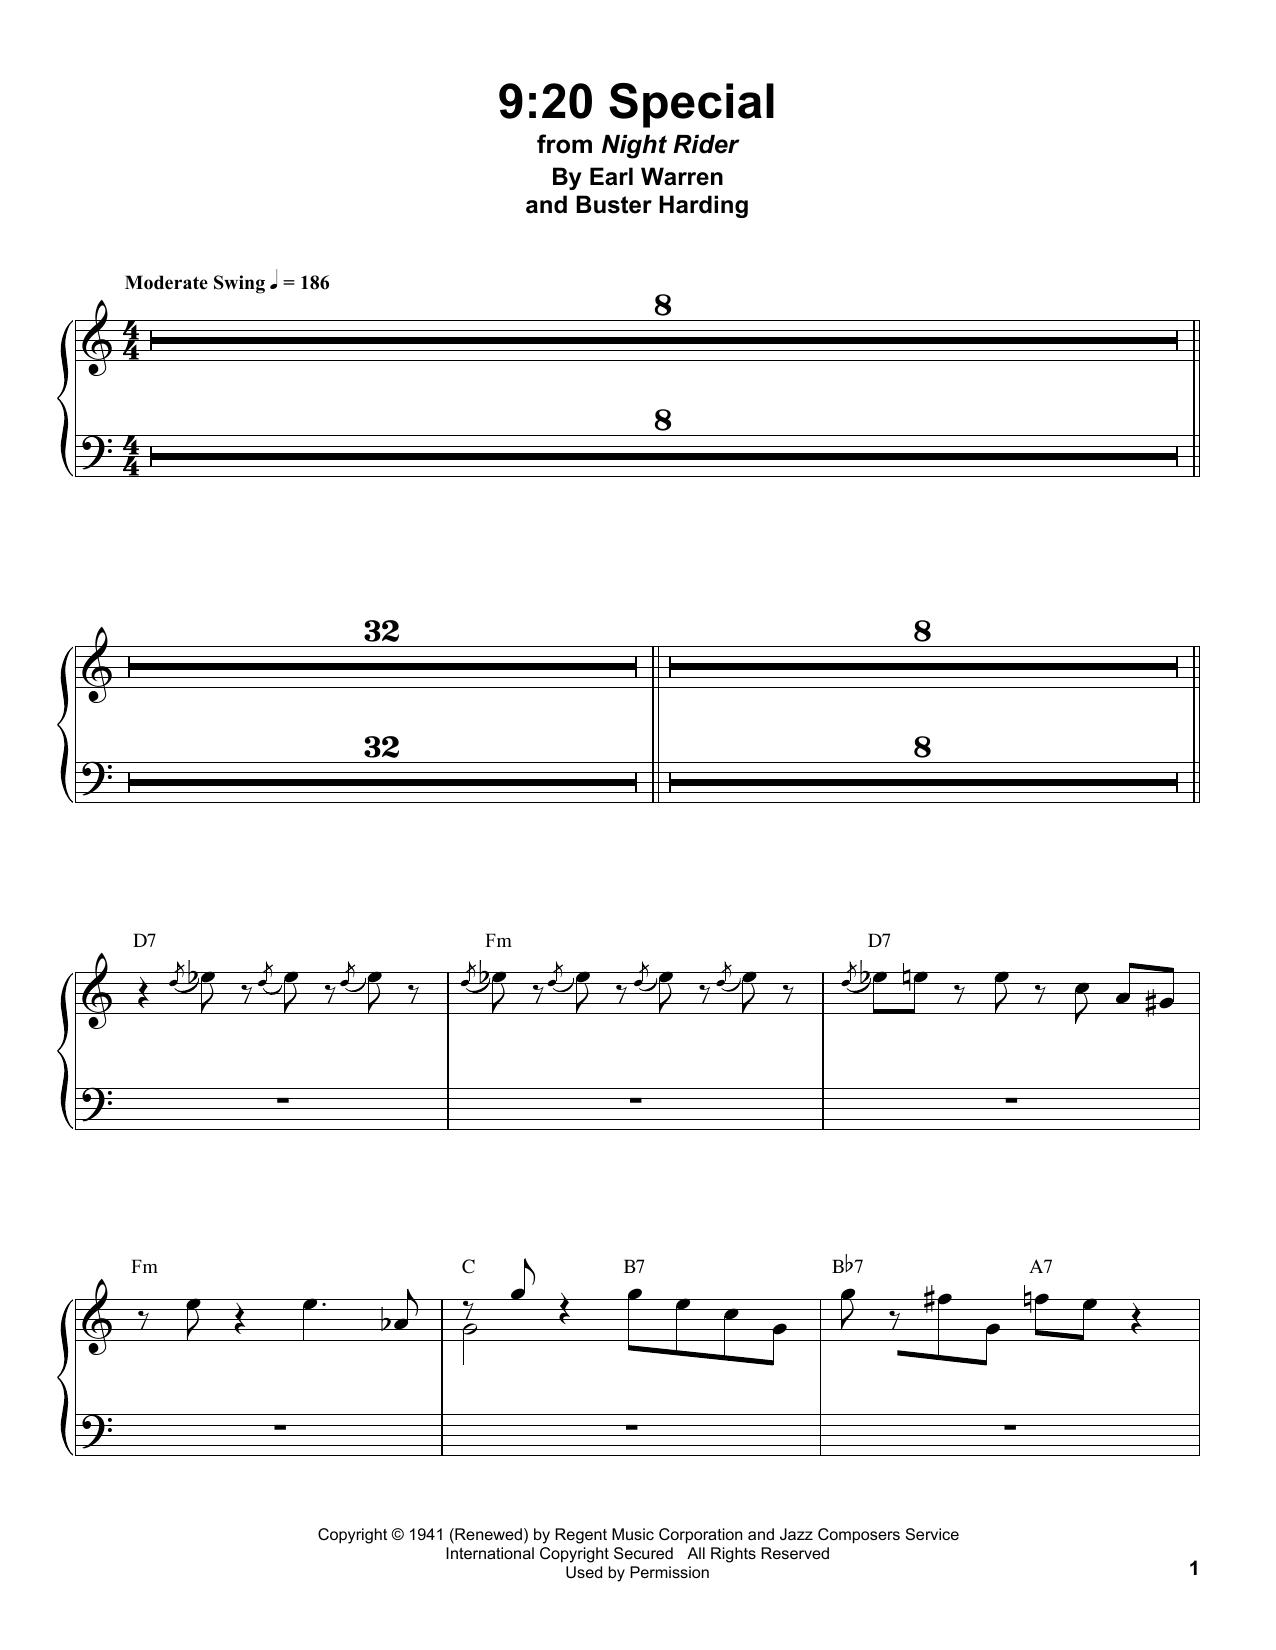 Download Count Basie 9:20 Special Sheet Music